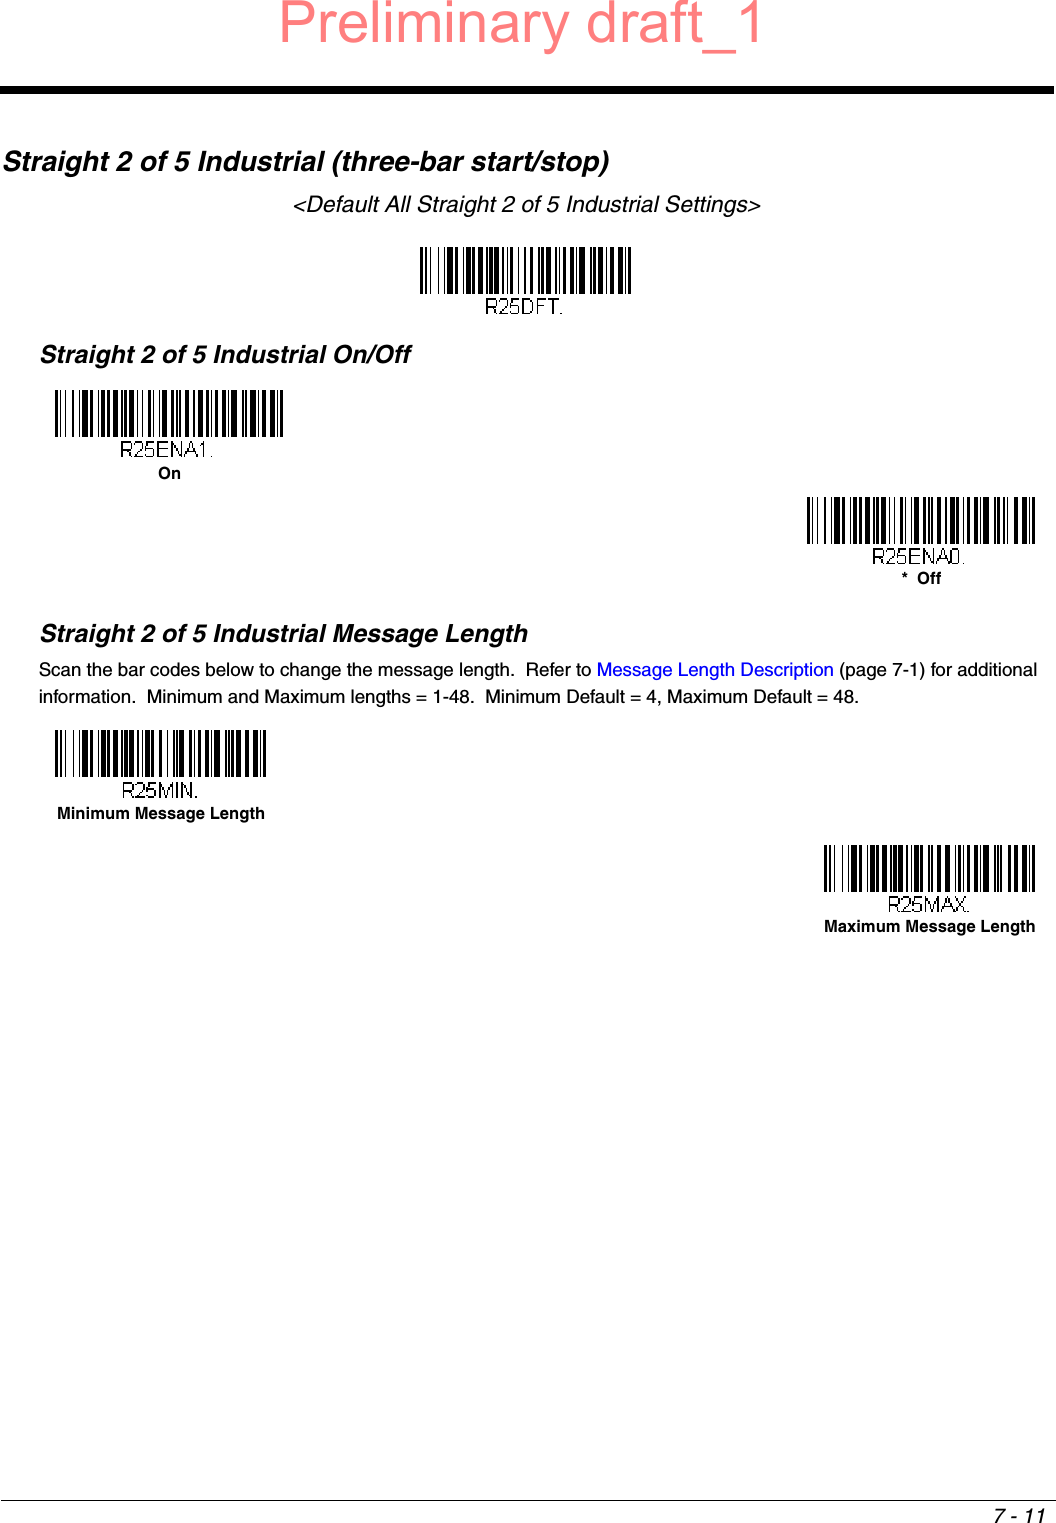 7 - 11Straight 2 of 5 Industrial (three-bar start/stop)&lt;Default All Straight 2 of 5 Industrial Settings&gt;Straight 2 of 5 Industrial On/OffStraight 2 of 5 Industrial Message LengthScan the bar codes below to change the message length.  Refer to Message Length Description (page 7-1) for additional information.  Minimum and Maximum lengths = 1-48.  Minimum Default = 4, Maximum Default = 48.On*  OffMinimum Message LengthMaximum Message LengthPreliminary draft_1